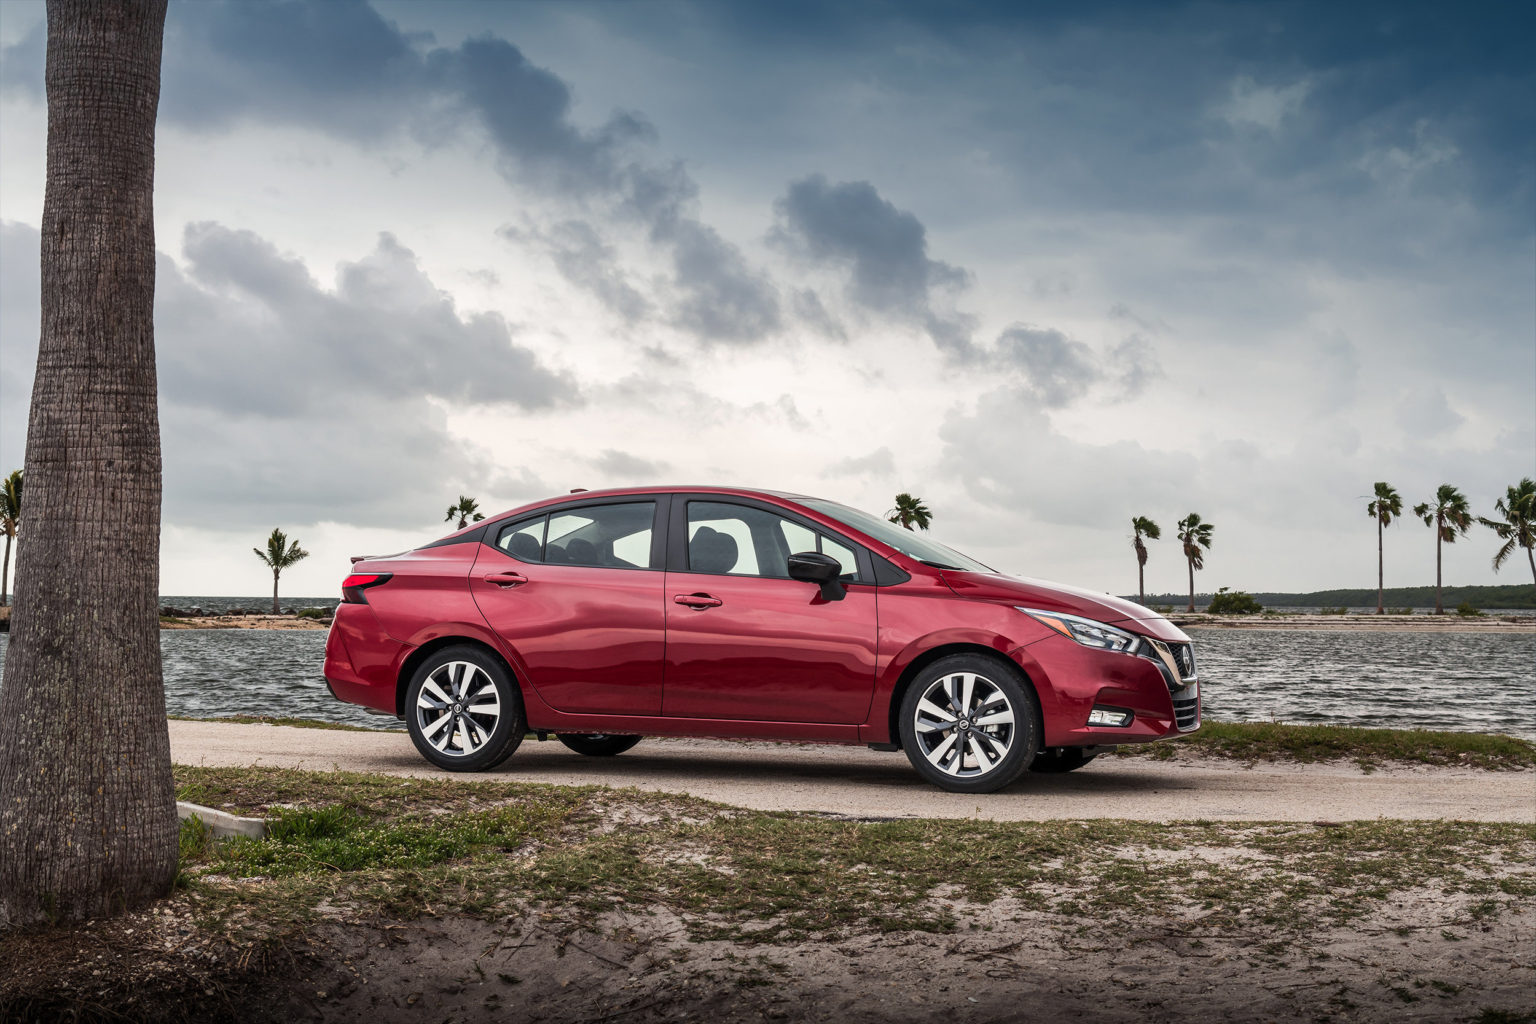 The redesigned Nissan Versa has come a long way since it's last generation.